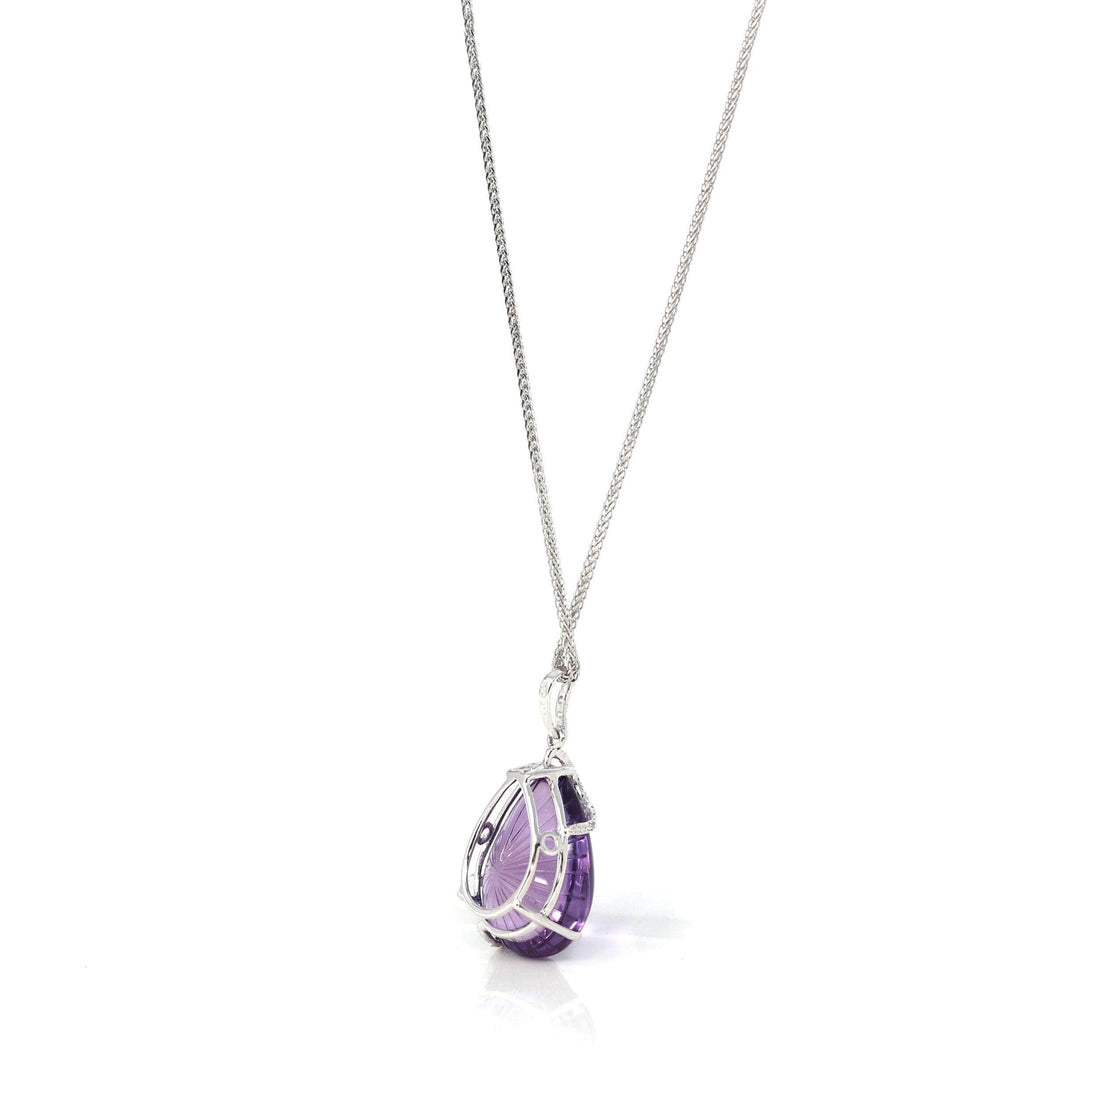 Shop Now Our 14k White Gold Amethyst Gemstone Cluster Pendant At Cheap Price